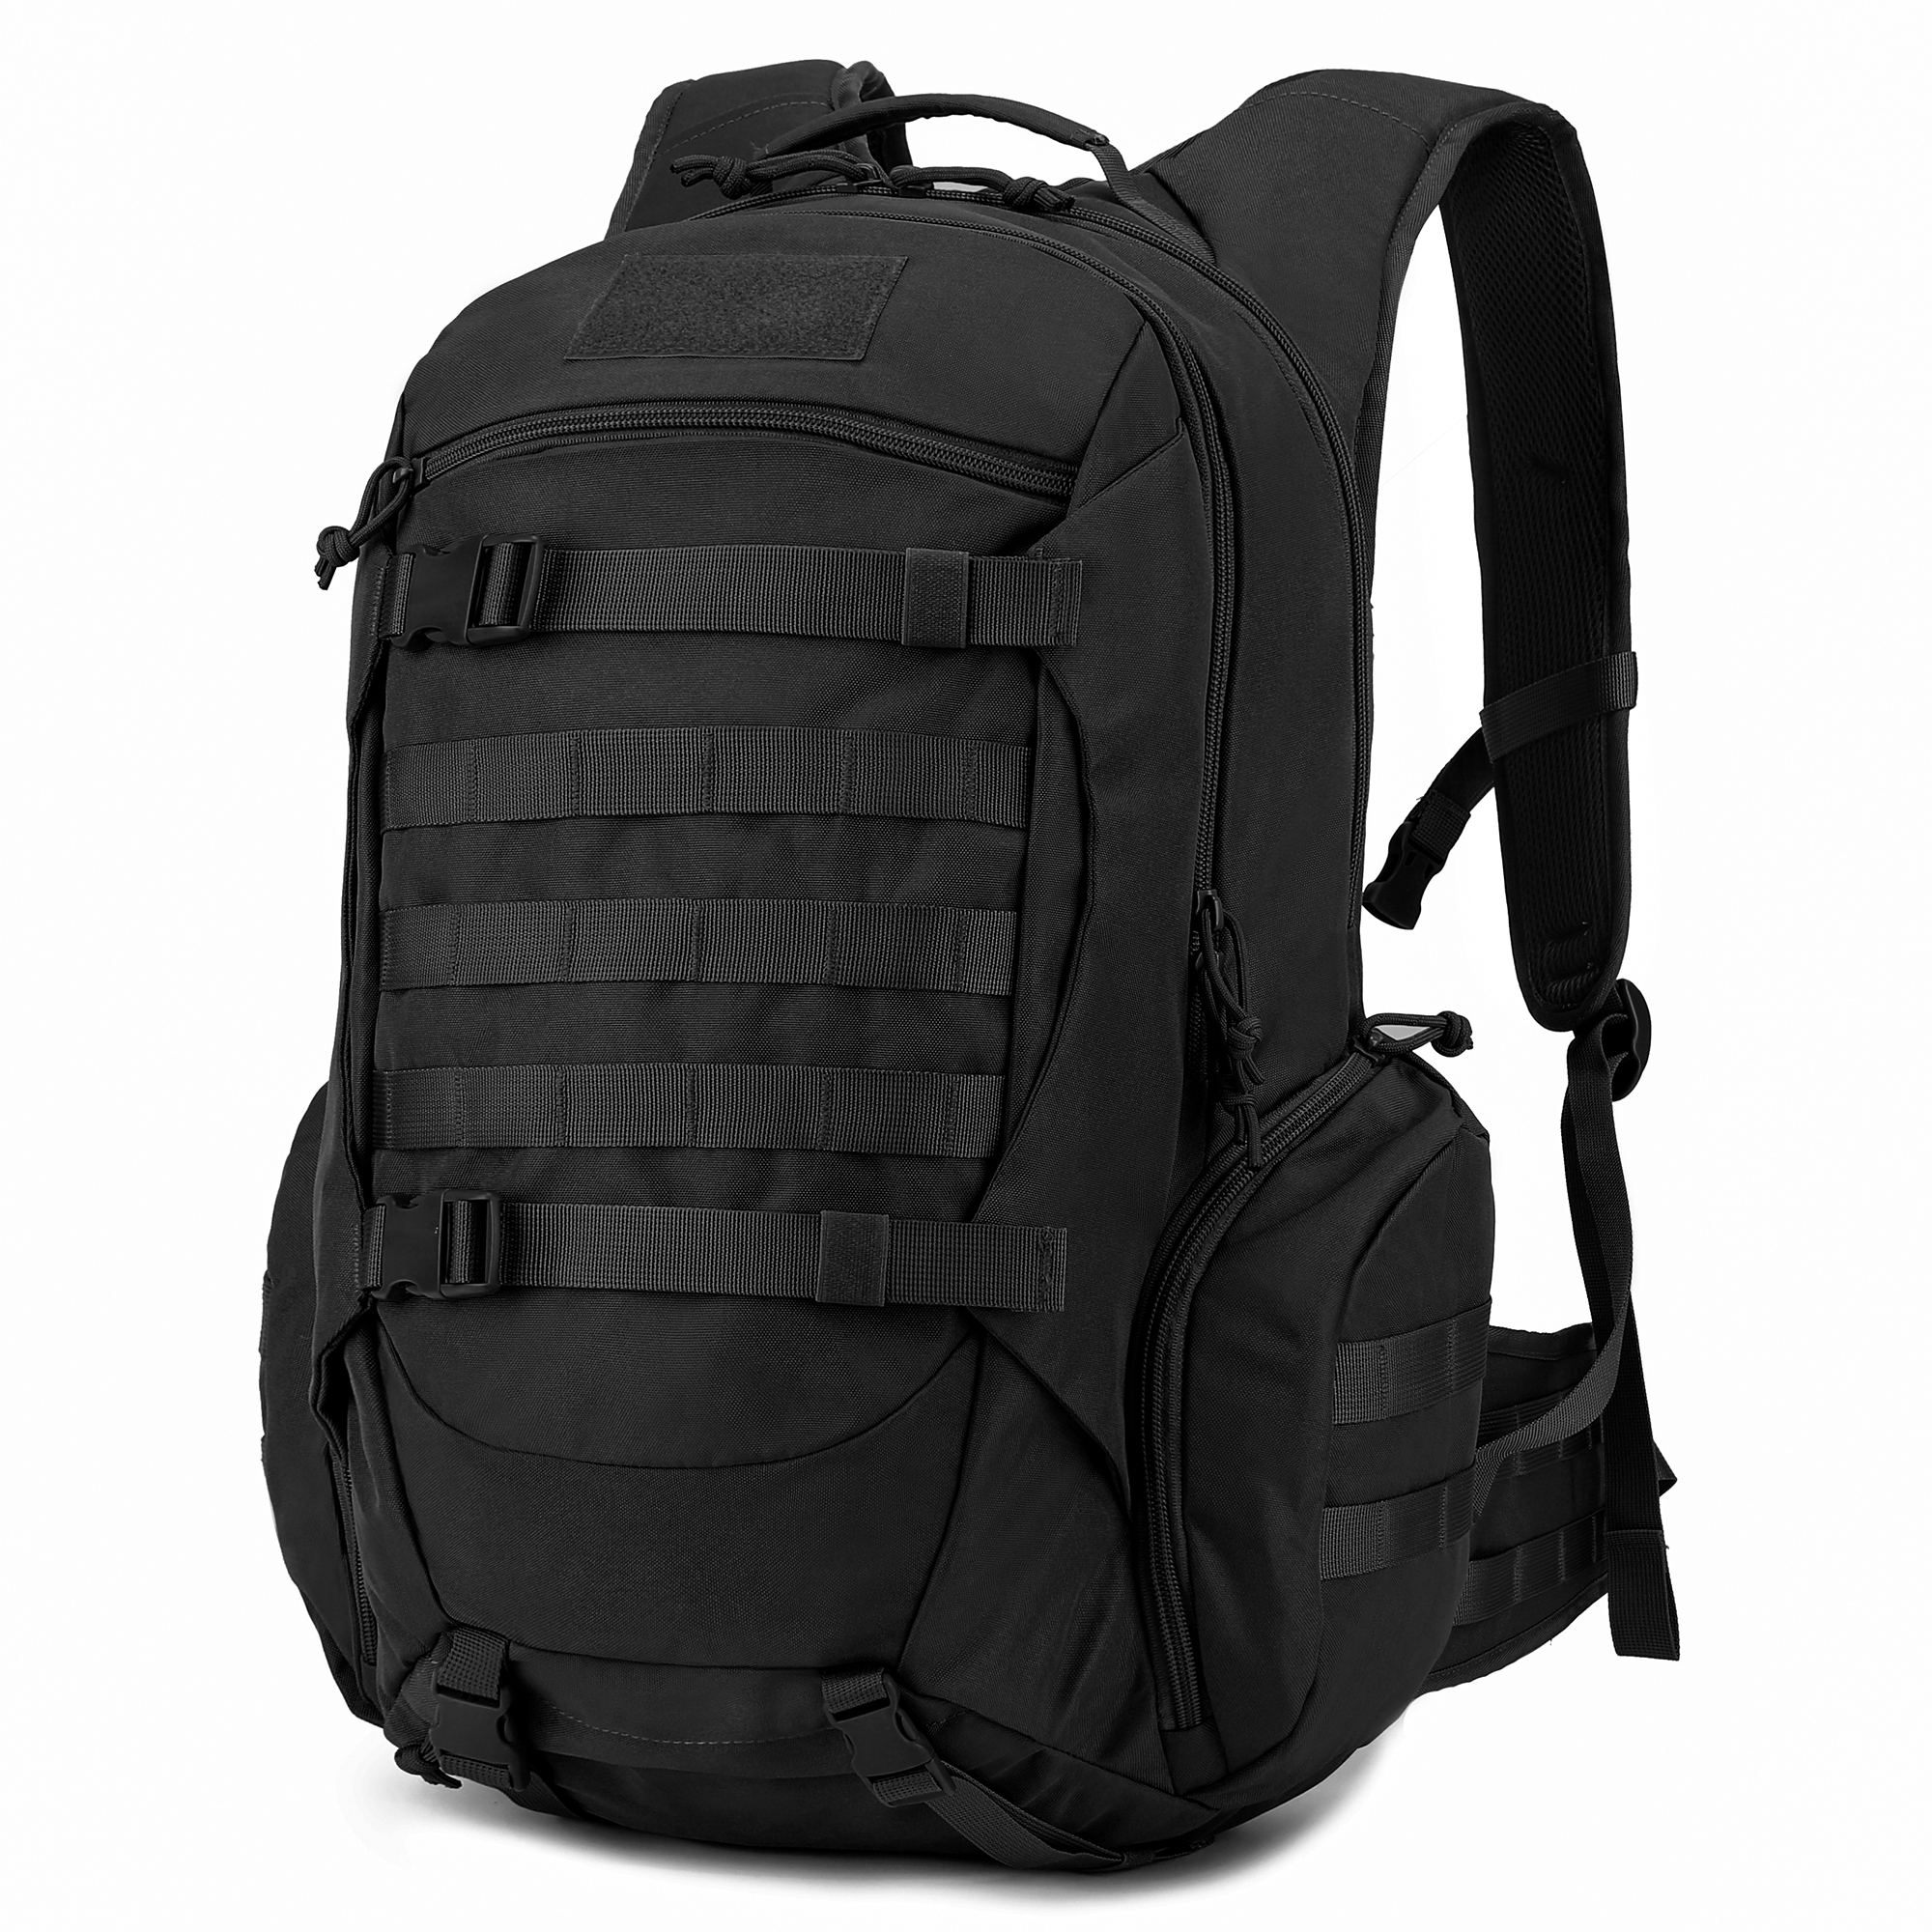 M6299] Mardingtop 25L Tactical Backpack Hiking Daypack Small Molle Backpack  for Outdoor Adventure